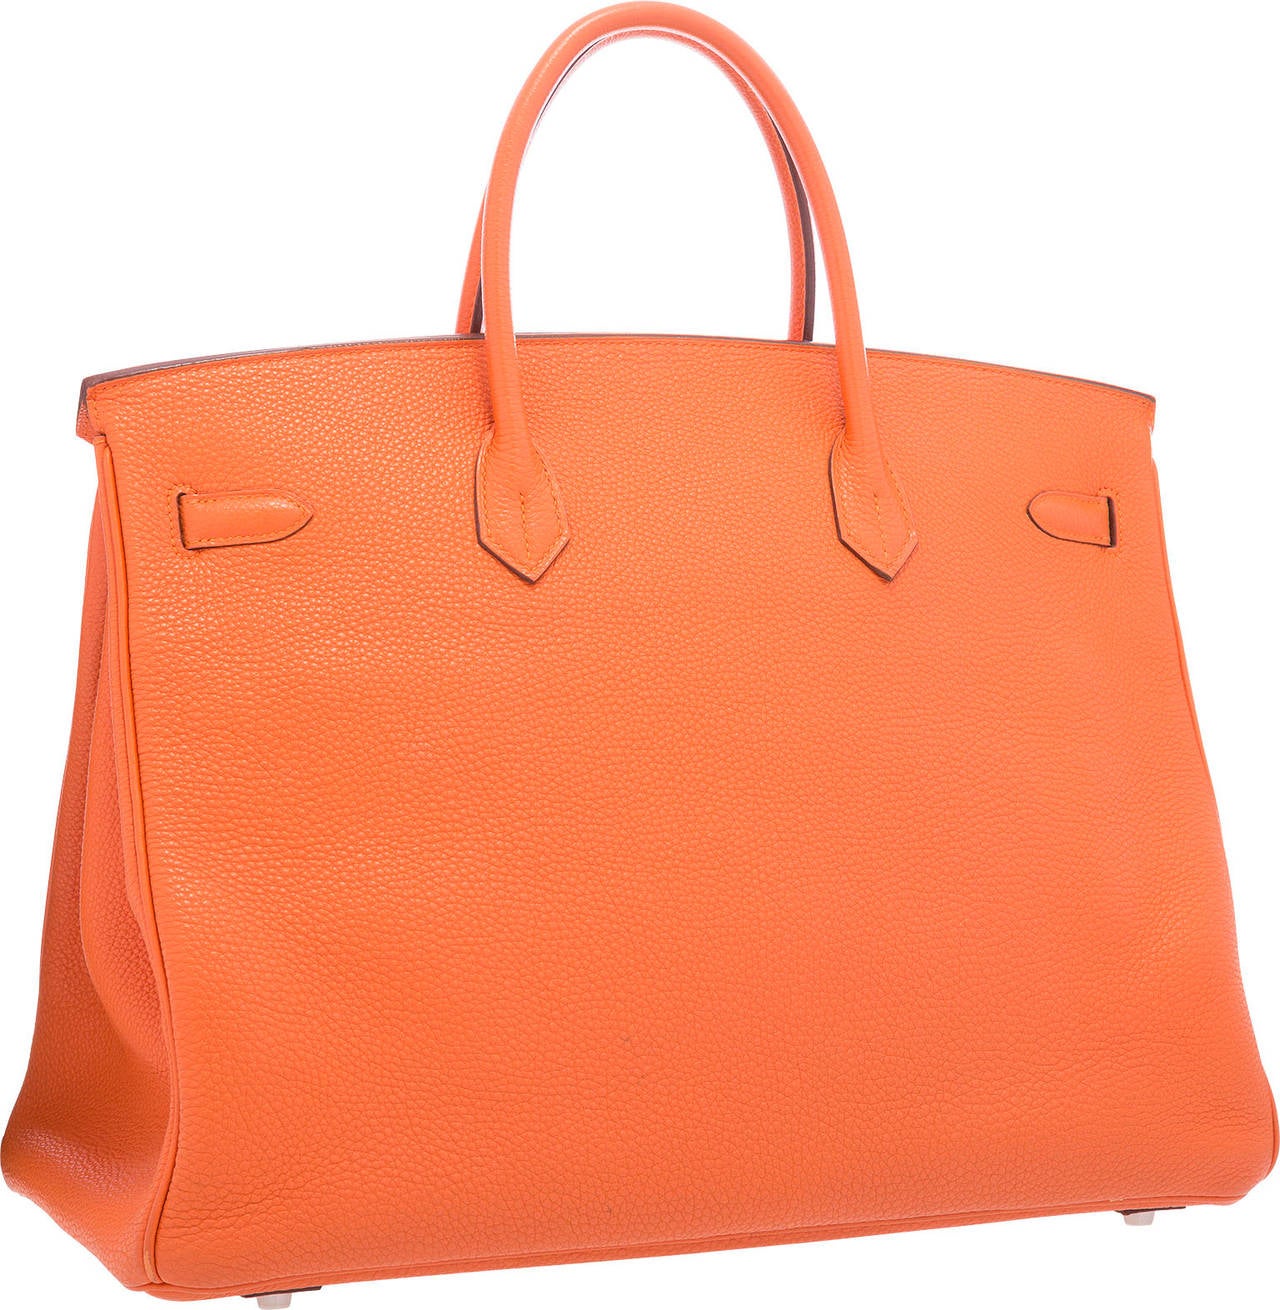 Hermes 40cm Orange H Togo Leather Birkin Bag with Palladium Hardware In Good Condition For Sale In New York, NY